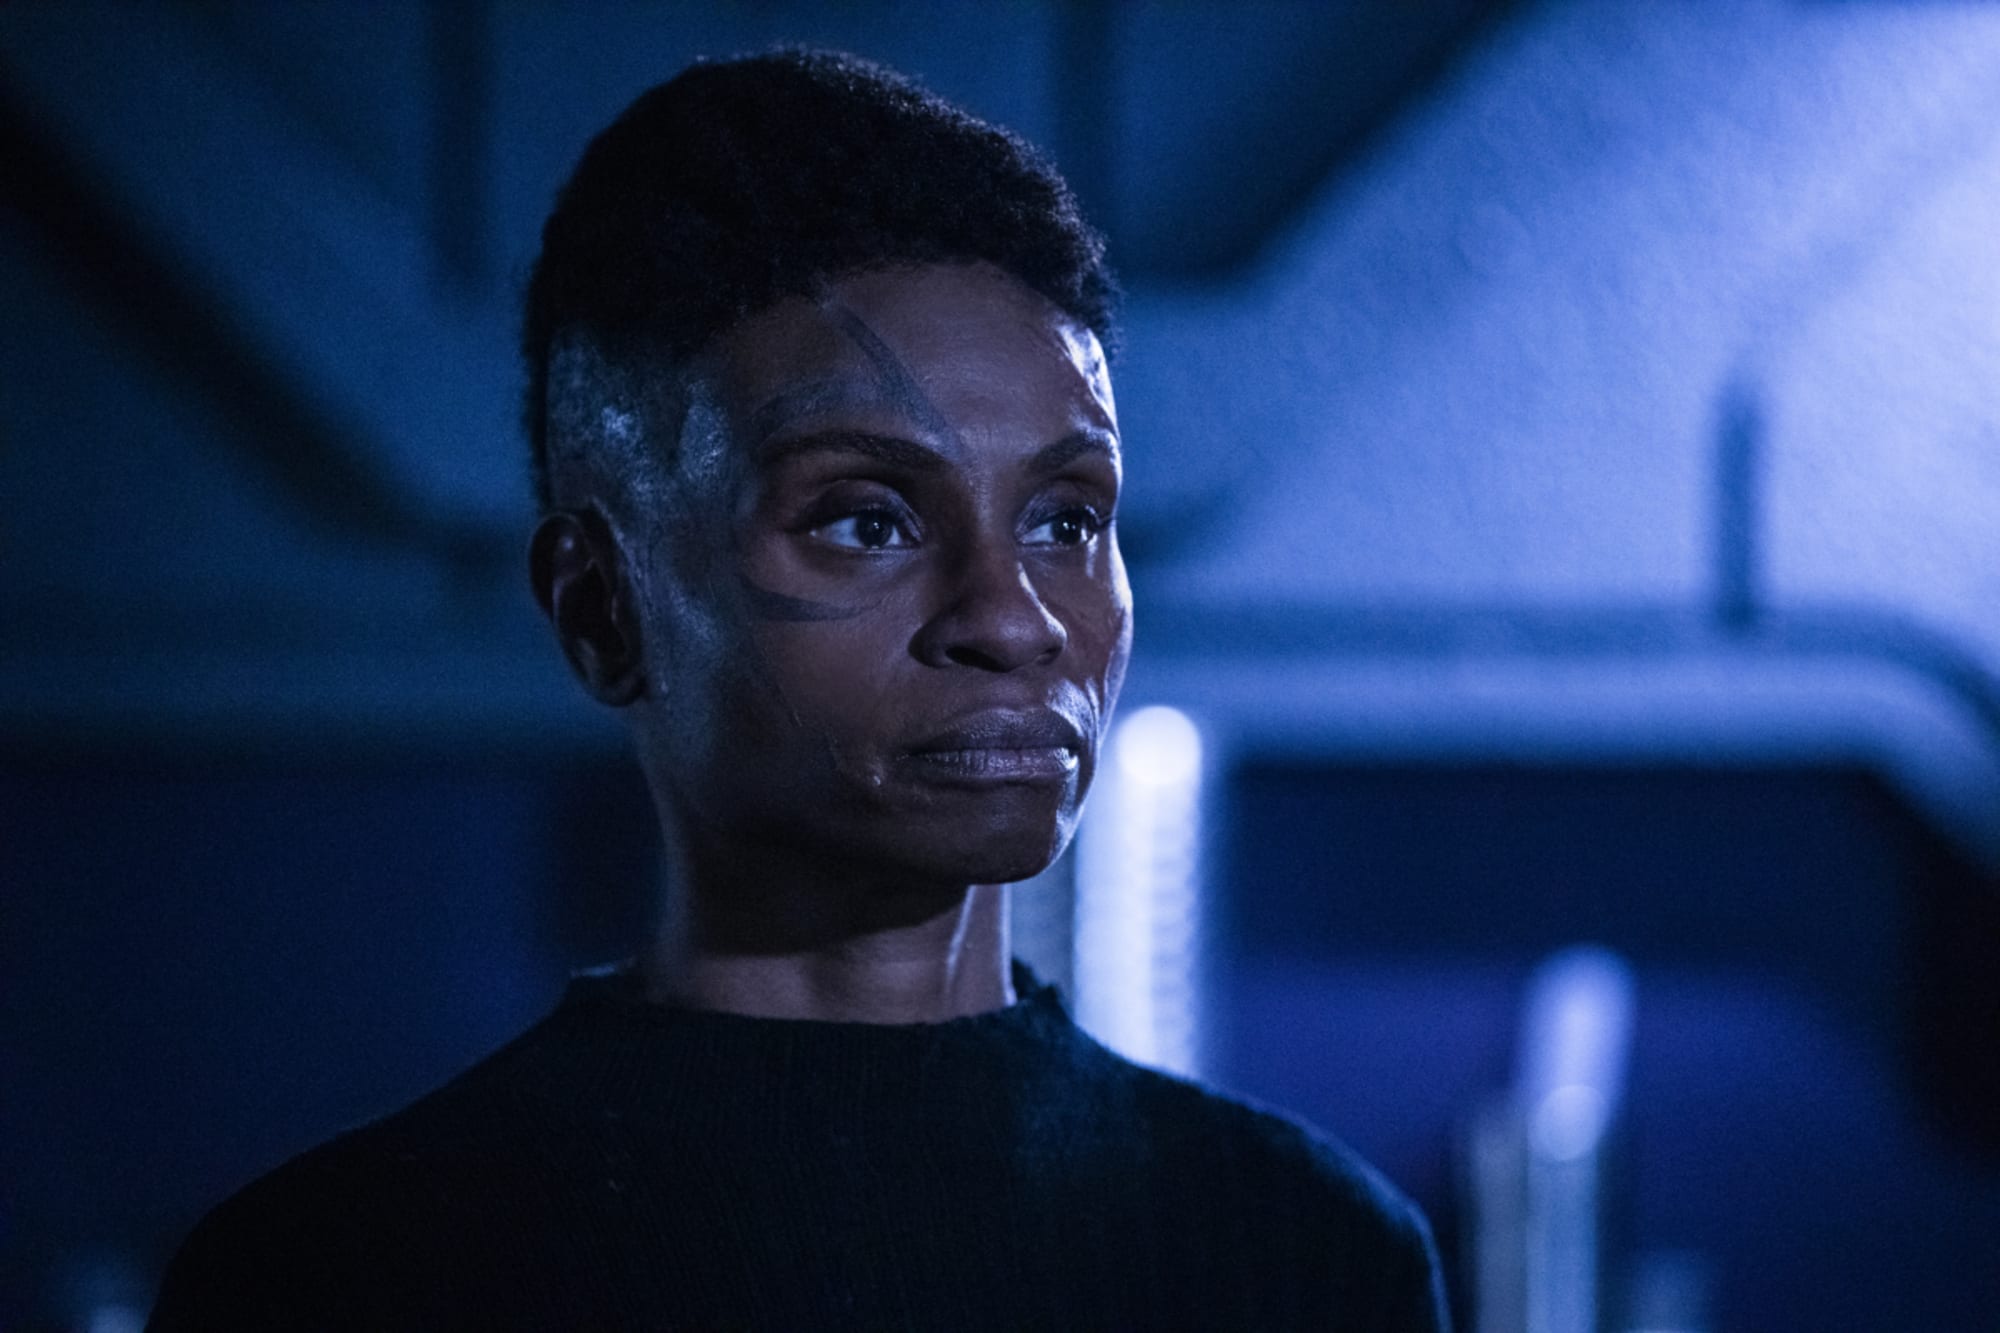 Indra from "The 100" poses in a spaceship.